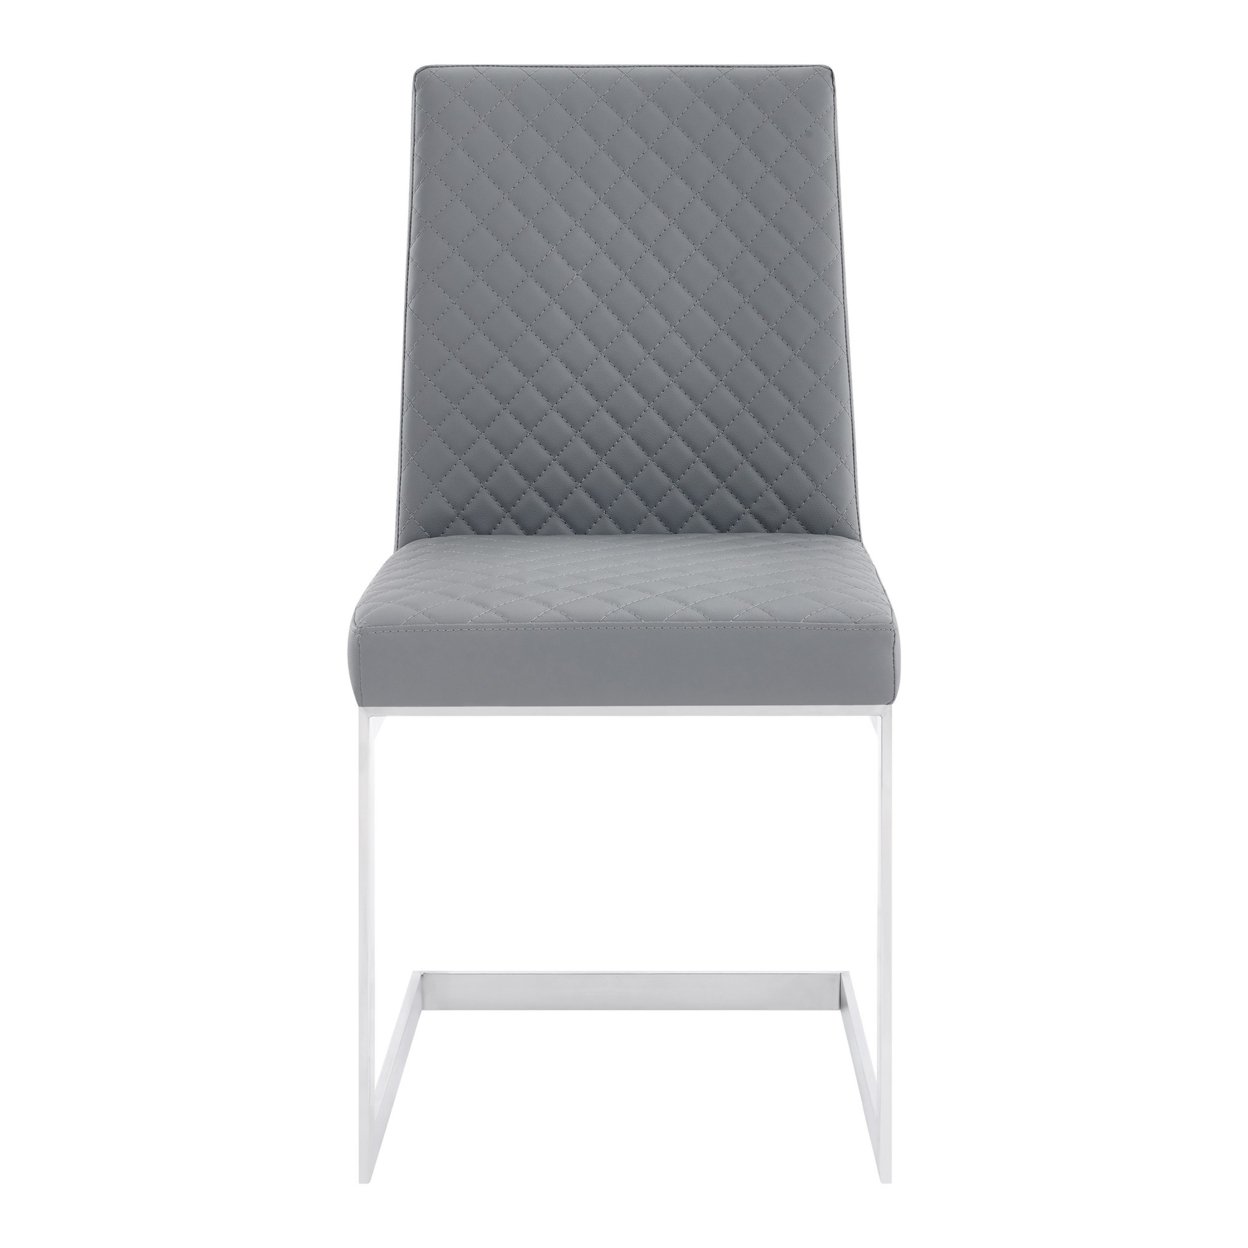 20 Inches Diamond Stitched Leatherette Dining Chair, Set Of 2, Gray- Saltoro Sherpi